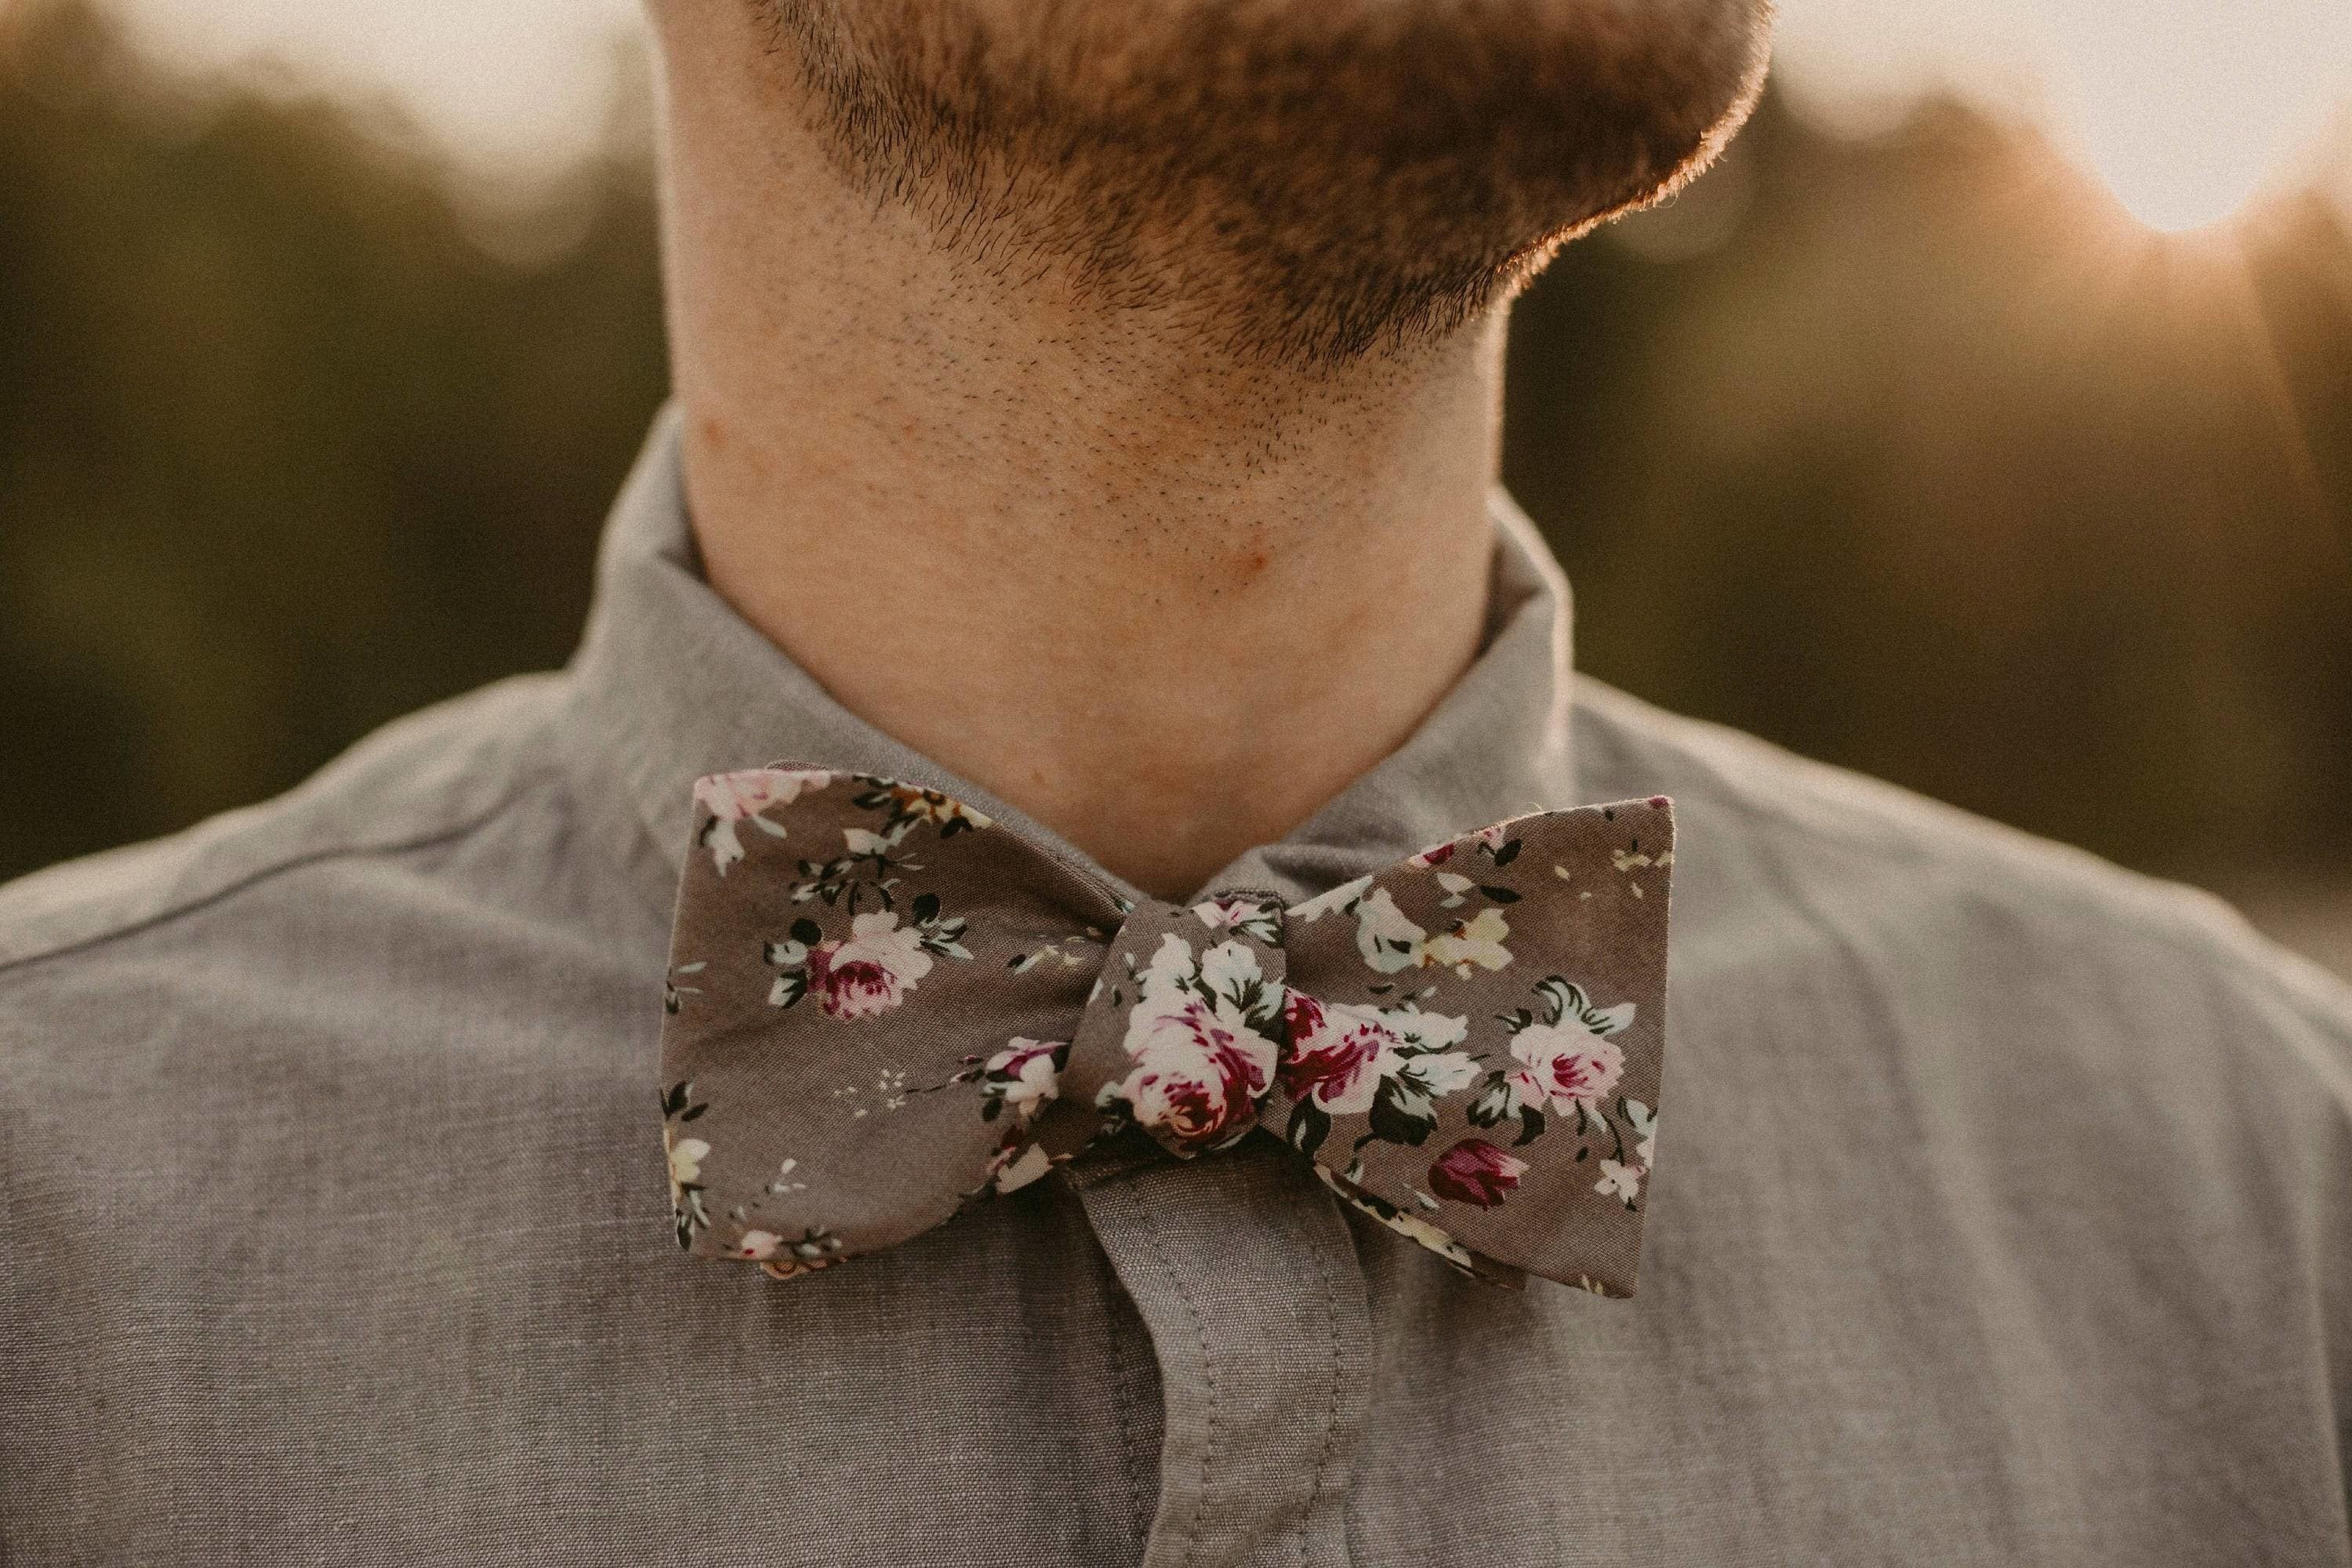 Gray Floral Bow Tie Self Tie Taupe SANDY Mytieshop-Gray Floral Bow Tie Self Tie 100% Cotton Flannel Handmade Adjustable to fit most neck sizes 13 3/4&quot; - 18&quot; Color: Mauve Sandy Bow tie for men. Mauve bow tie for men. White green blue and burgundy flowers. Spring has sprung with this dashing SANDY Mauve Self Tie Bow Tie. A light pink, green and blue tie for a modern gentleman. This tie is perfect for any season, with a versatile color palette that pops. Whether you wear it to your next wedding or 